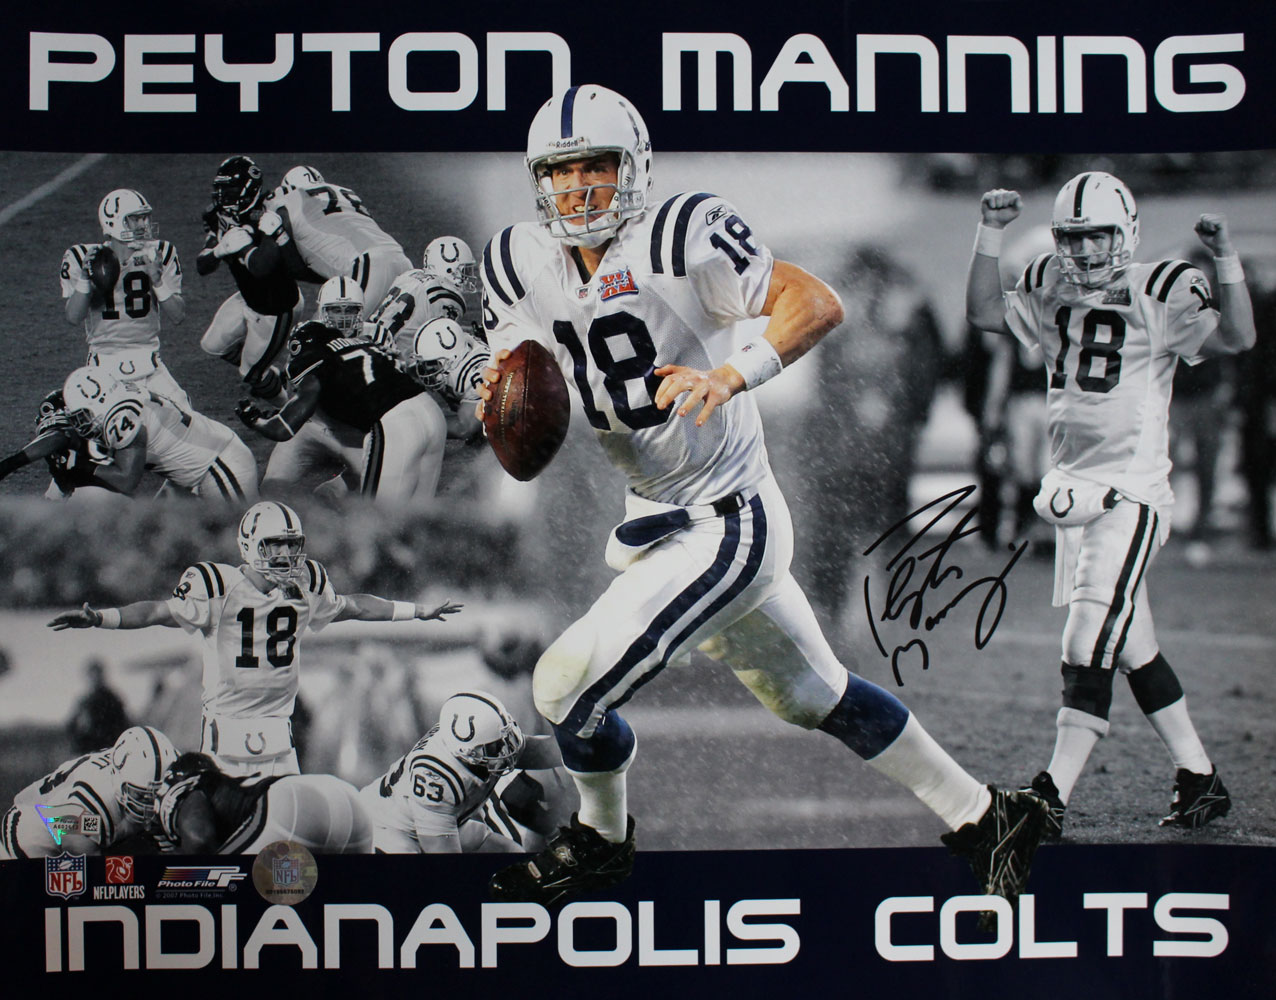 Peyton Manning Autographed/Signed Indianapolos Colts 16x20 Photo FAN 27267